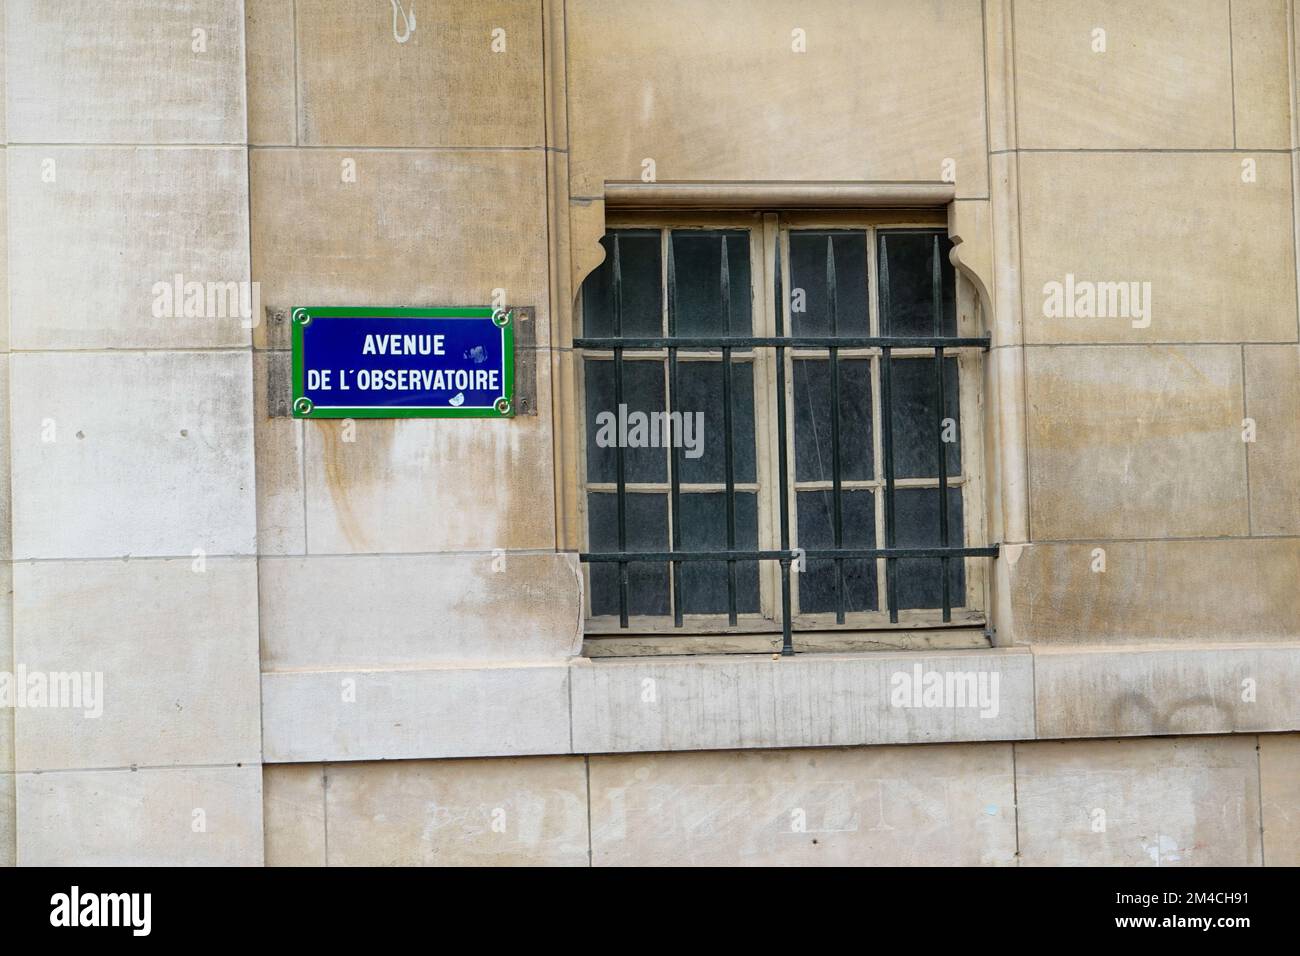 Street sign and barred window on building wall, Avenue de l’Observatoire, Paris, France. Stock Photo